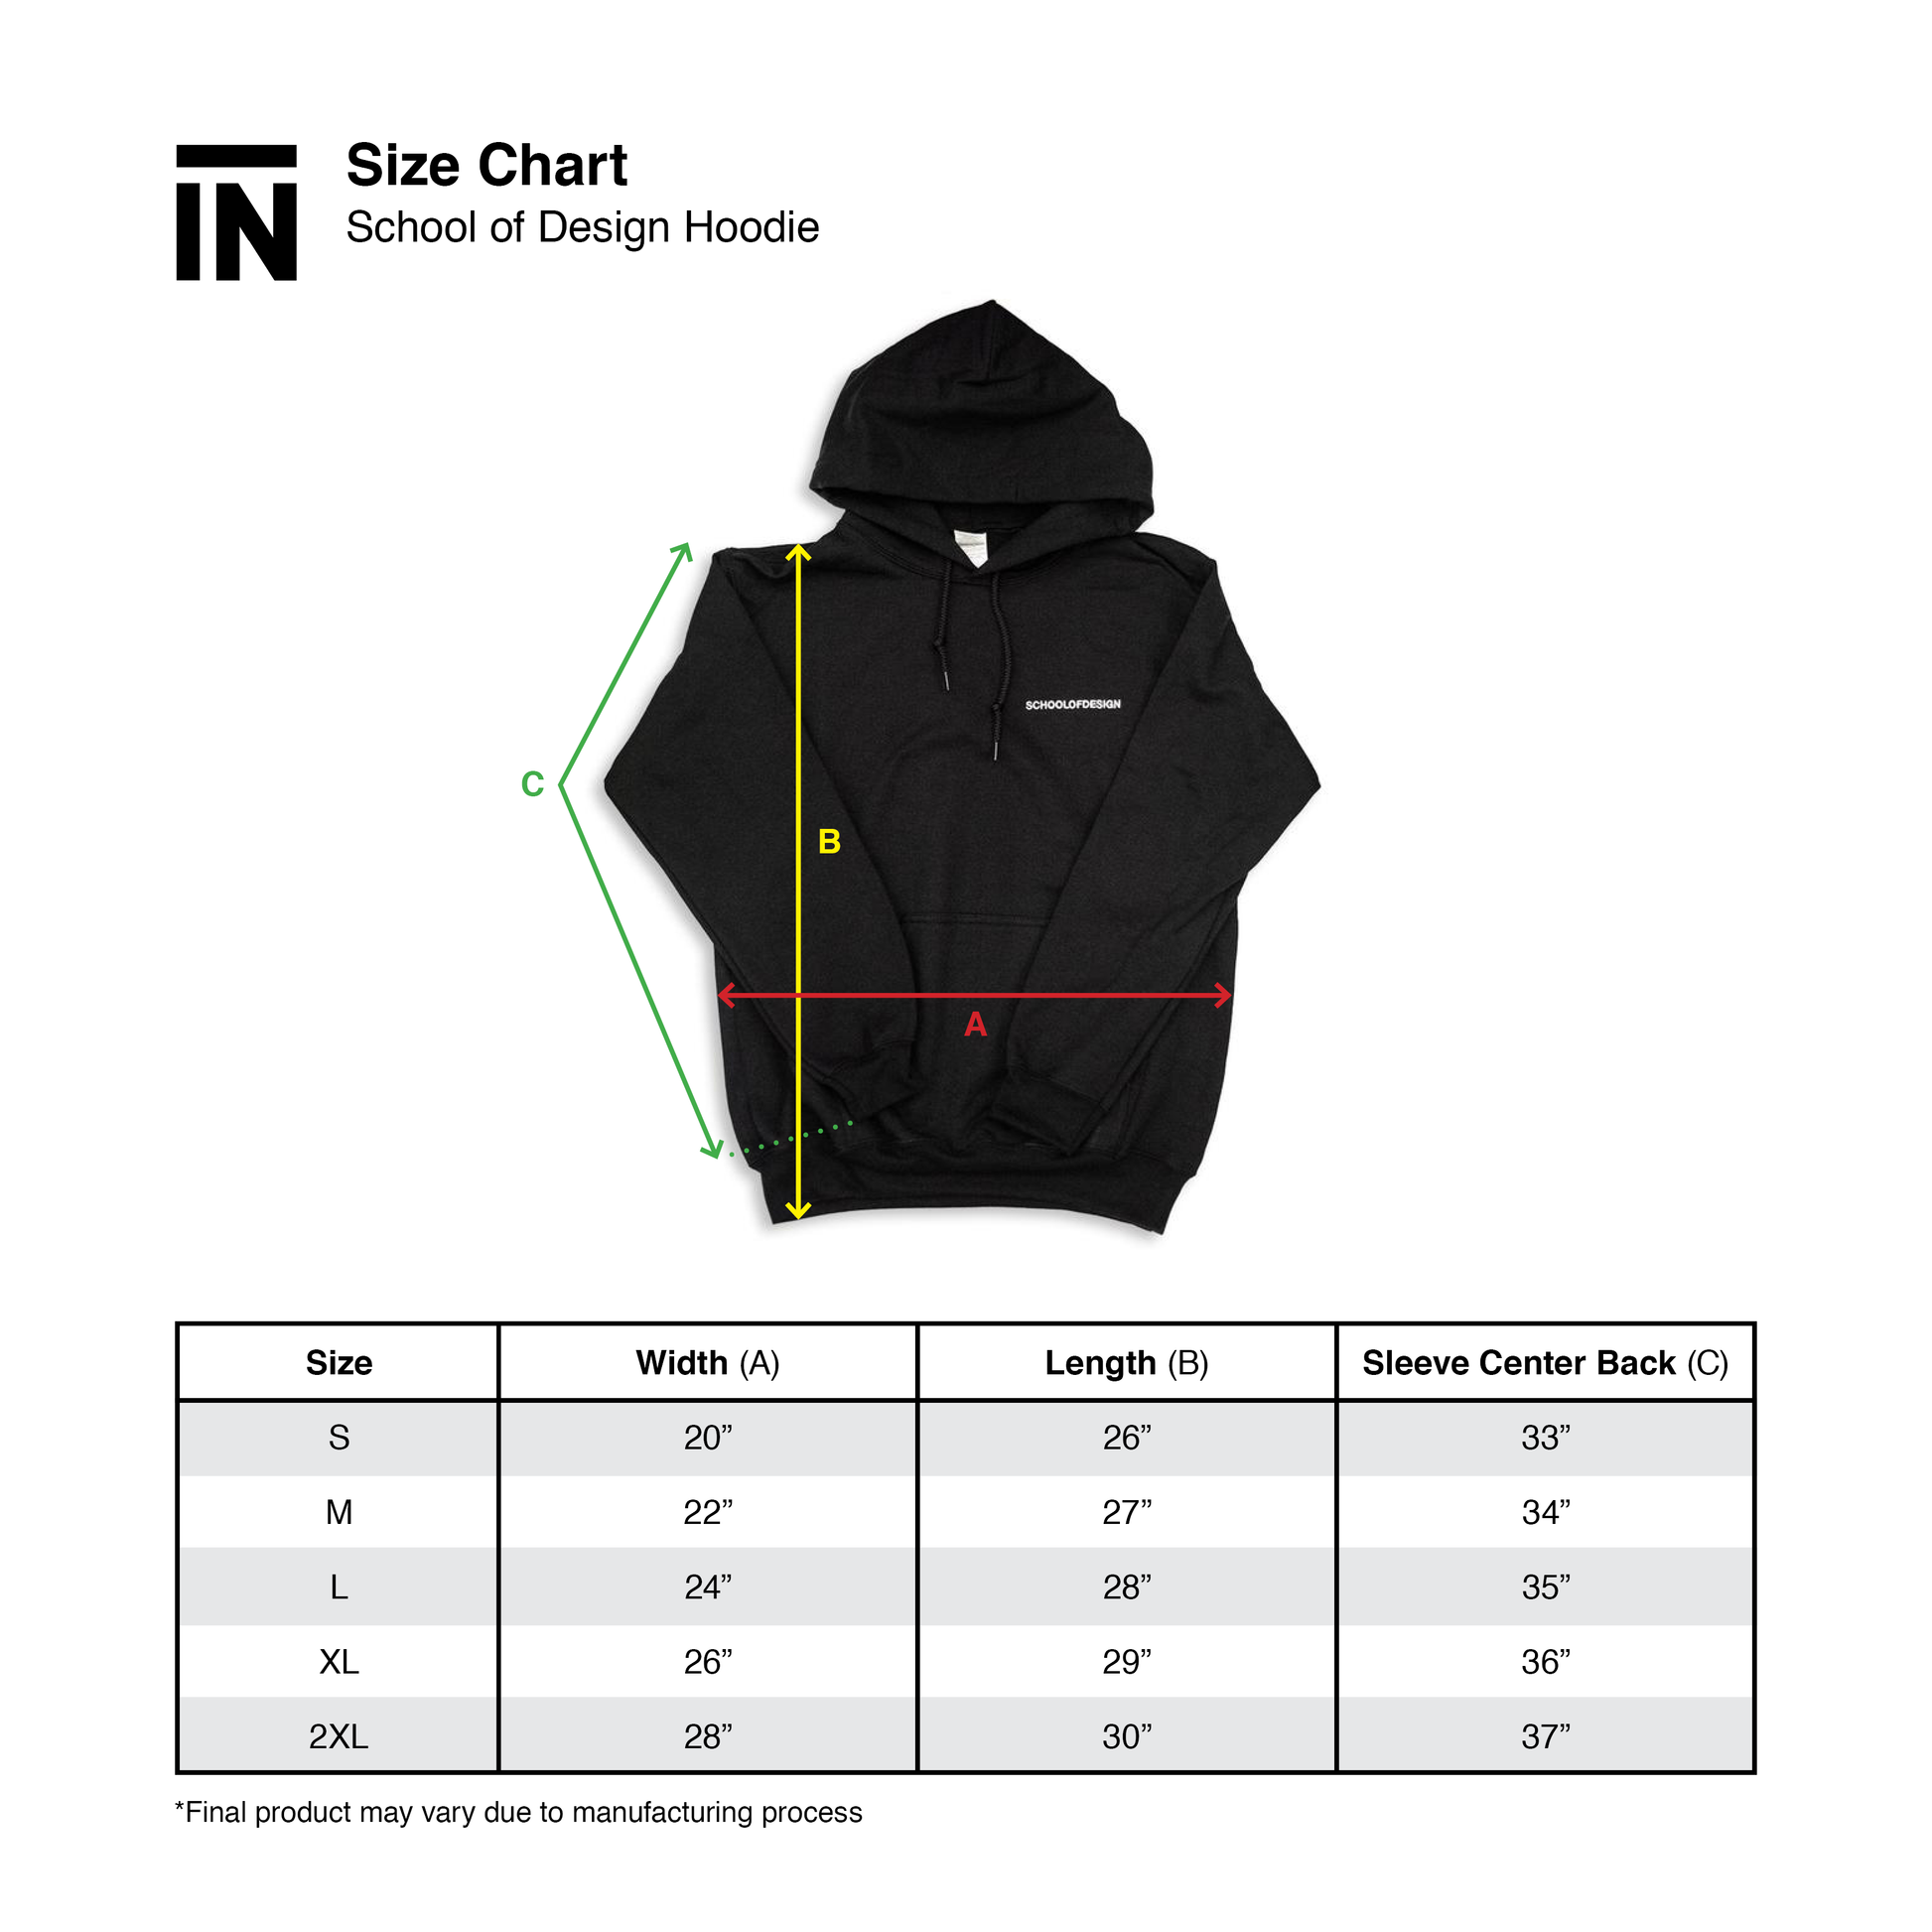 Size chart for SOD Hoodie. Size small: 20" width, 26" height, 33" Sleeve center back. Medium: 22" width, 27" height, 34" sleeve center back. Large: 24" width, 28" height, 35" sleeve center back. XL: 26" width, 29" height, 36" sleeve center back. 2XL: 28" width, 30" height, 37" sleeve center back.